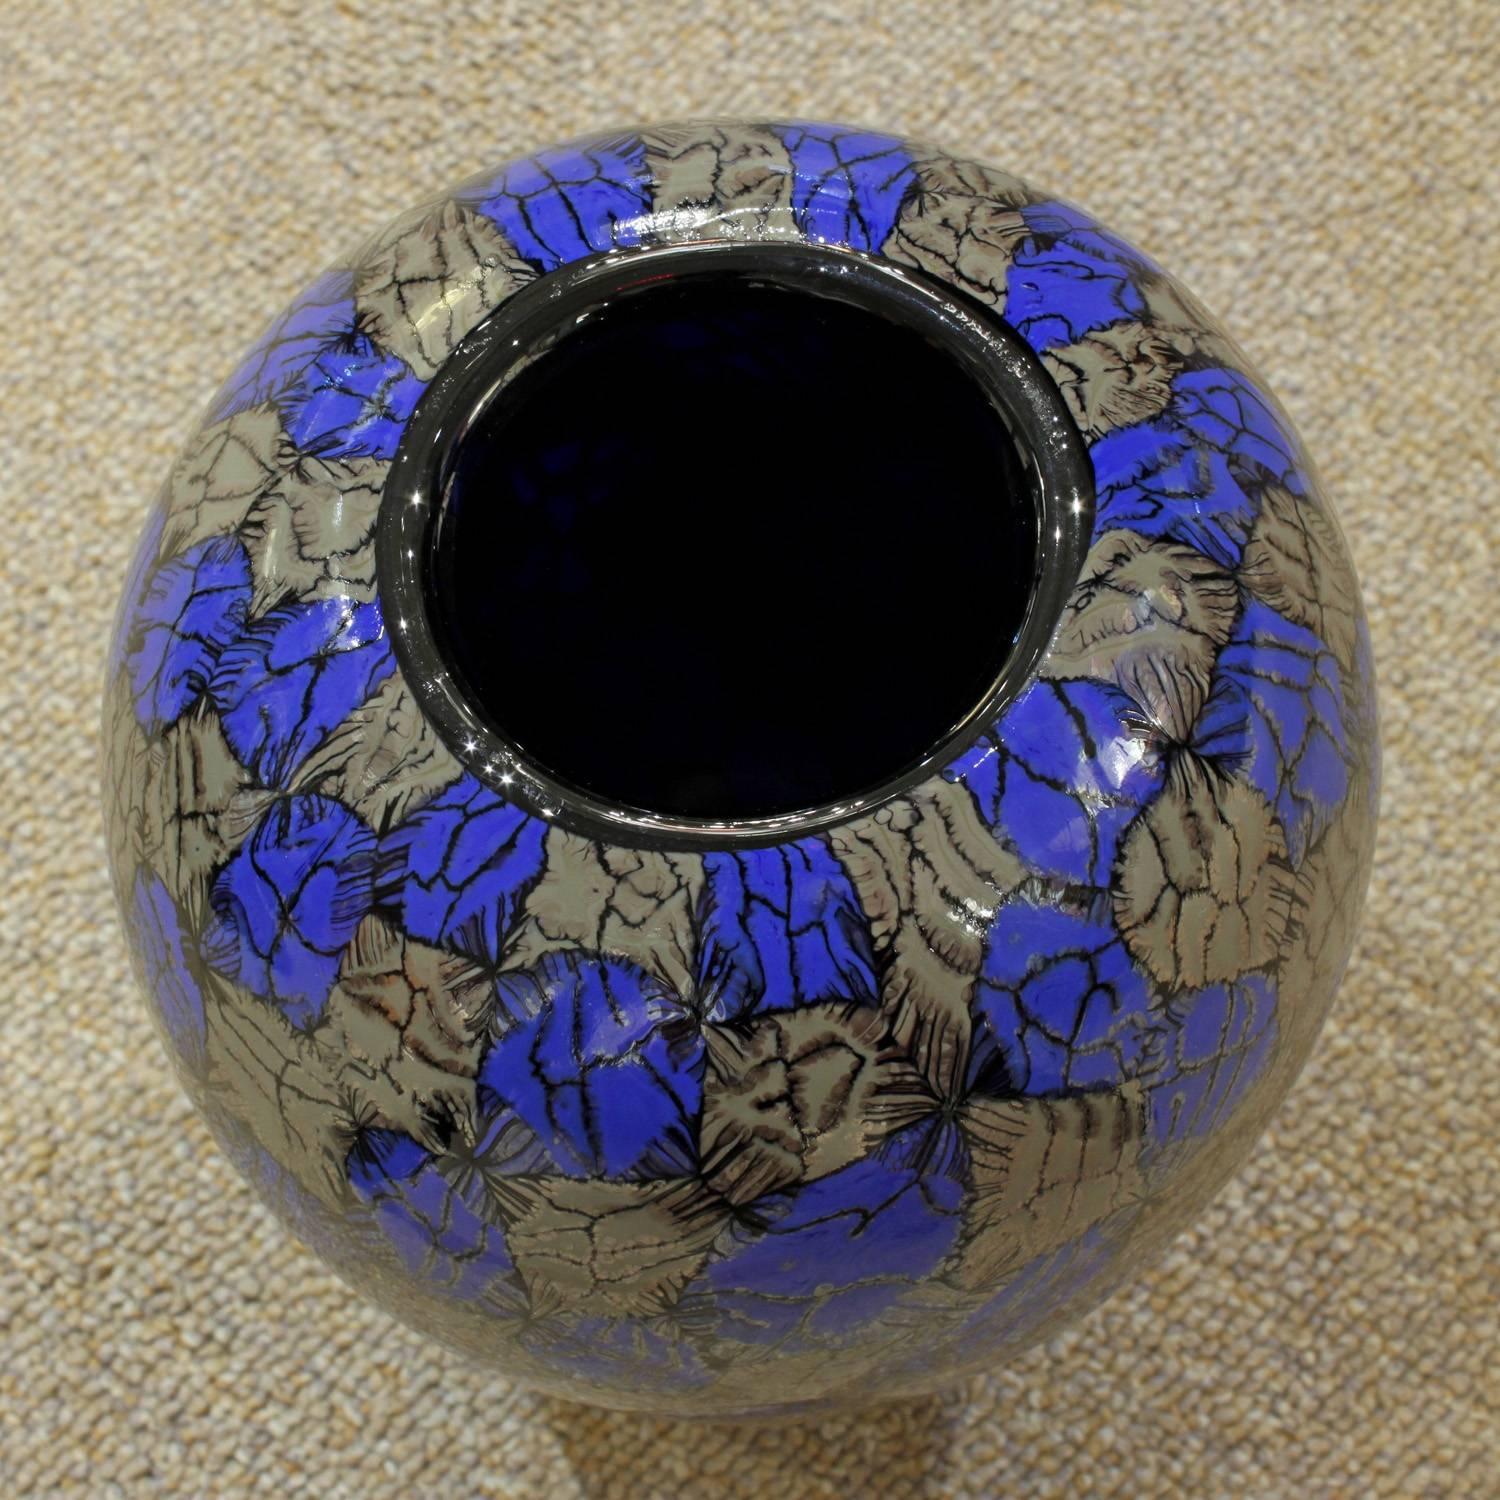 Handblown glass vase, footed with unique gunmetal and blue murrhines by 
Vittorio Ferro for Fratelli Pagnin, Murano Italy, circa 2000 (signed 